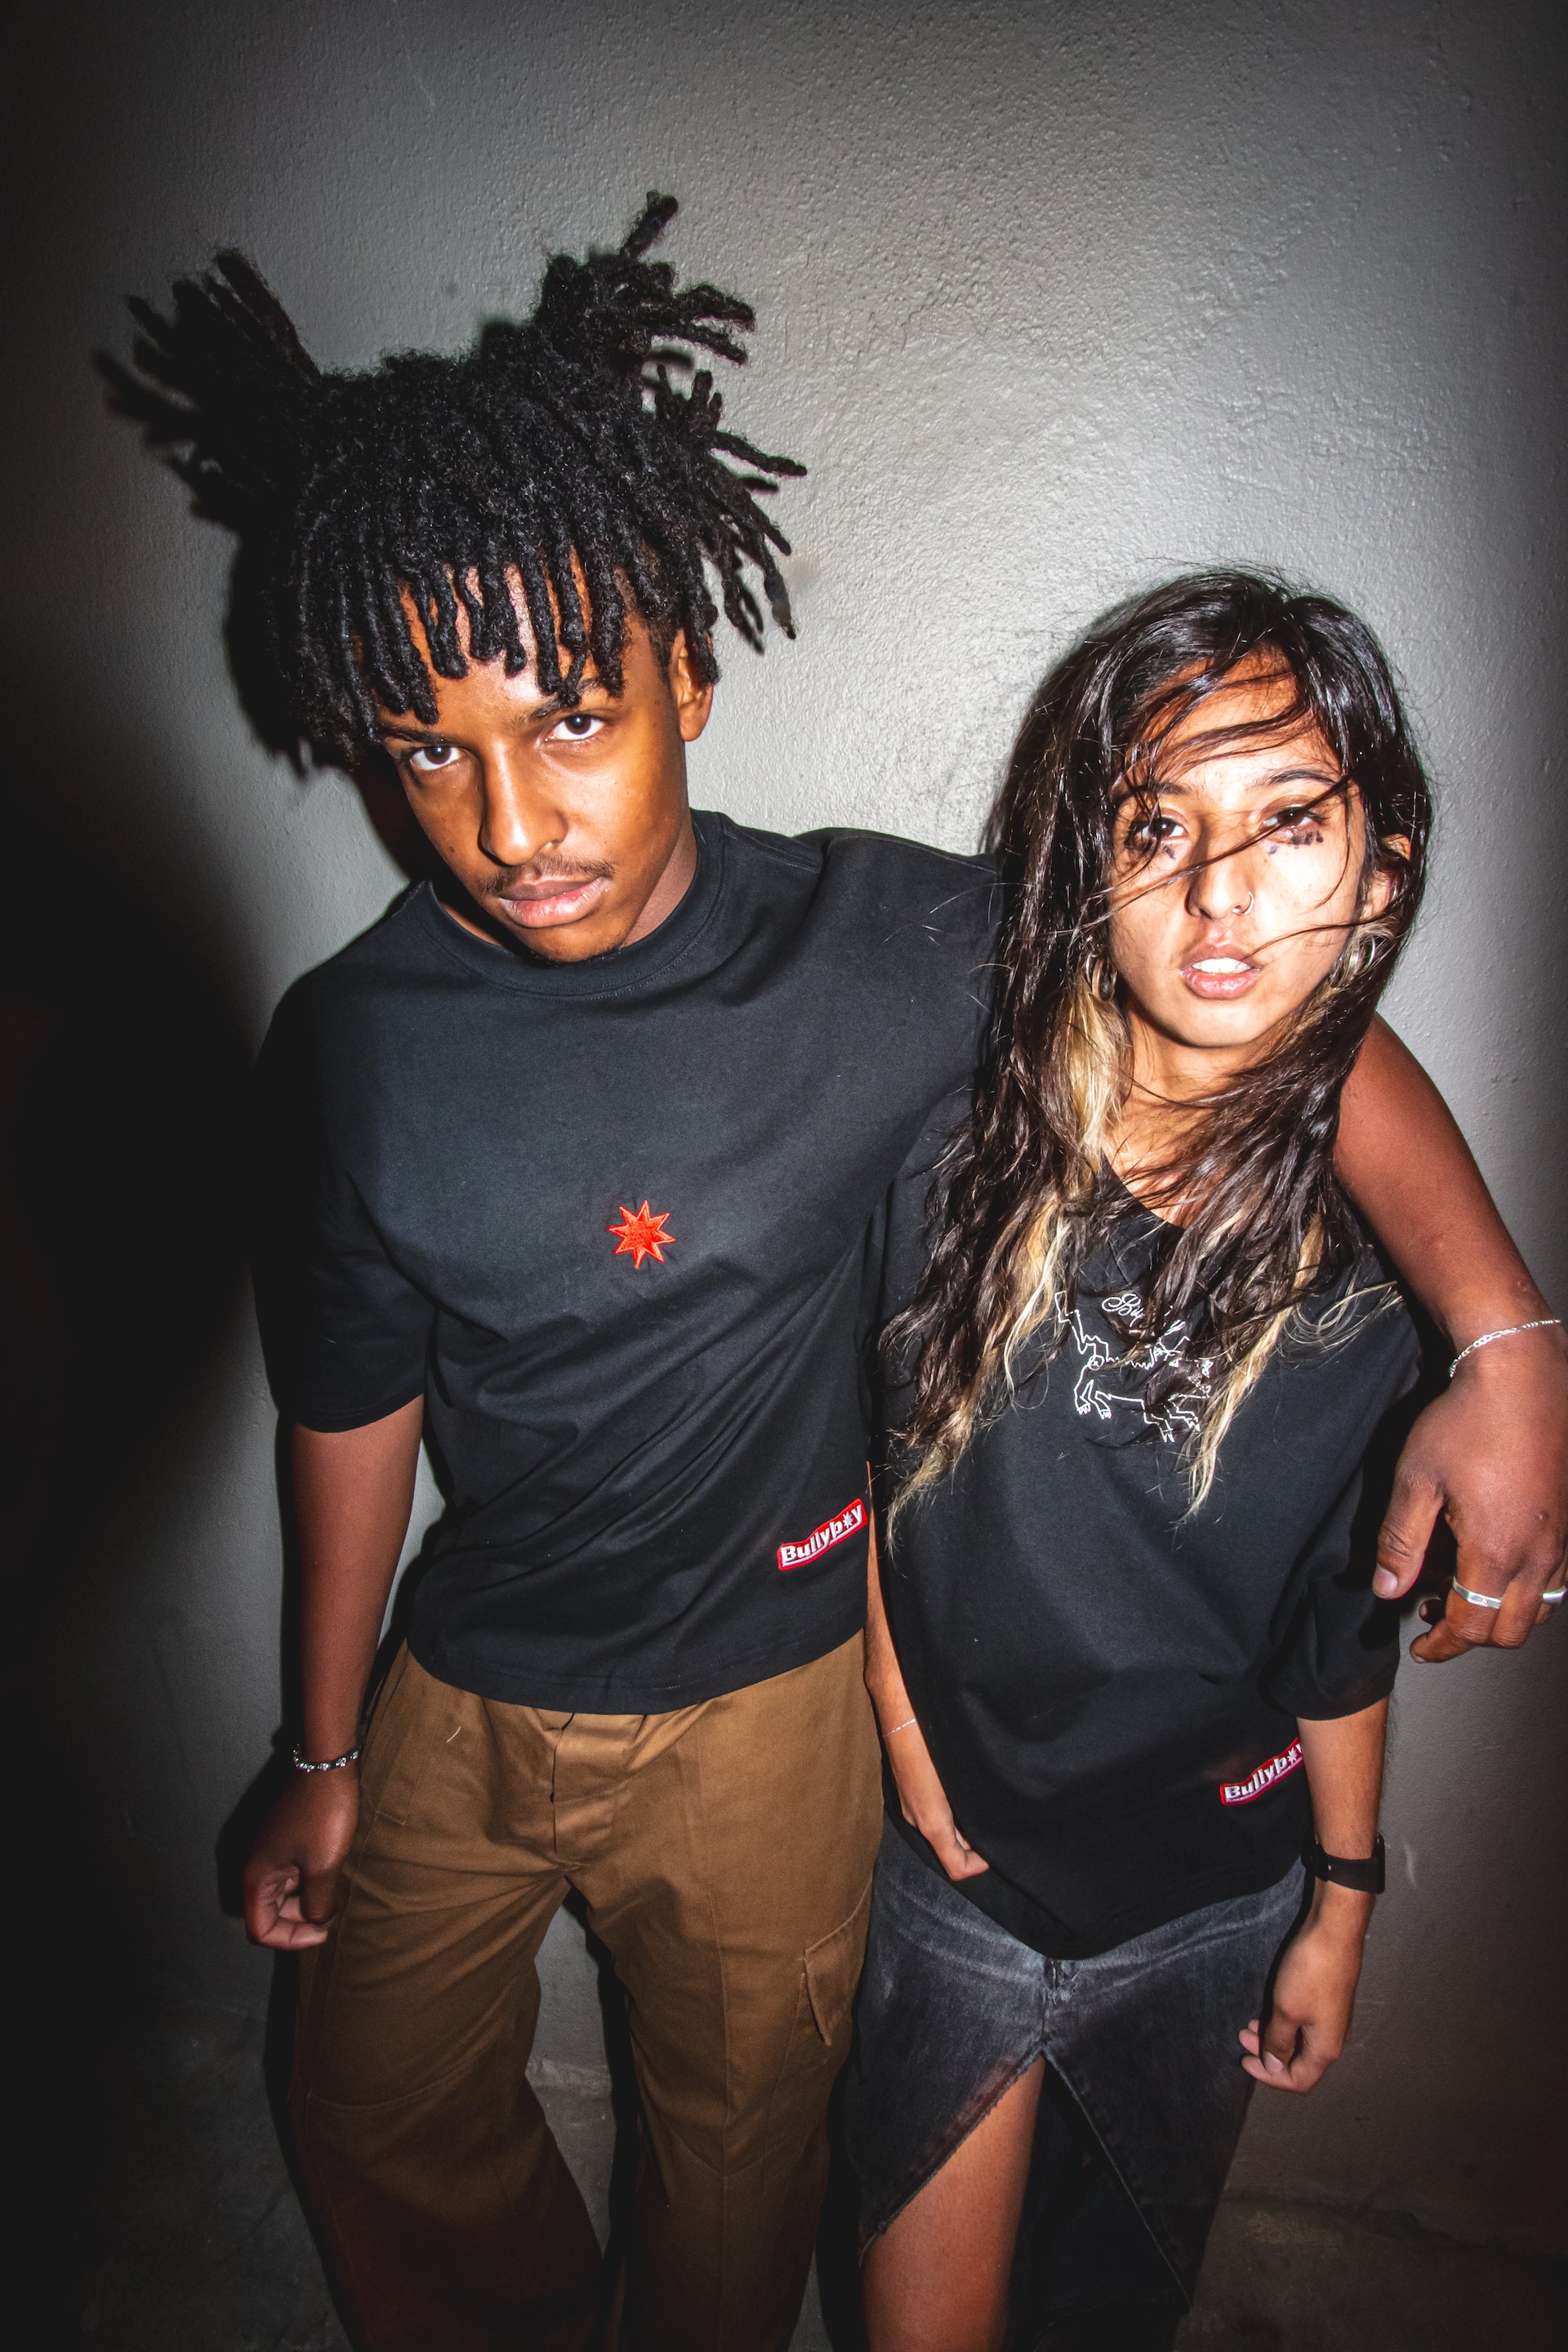 A shot from the Bullyboy Drop02 campaign shoot with Bullyboy models wearing the WOOF tee and the black daily tee